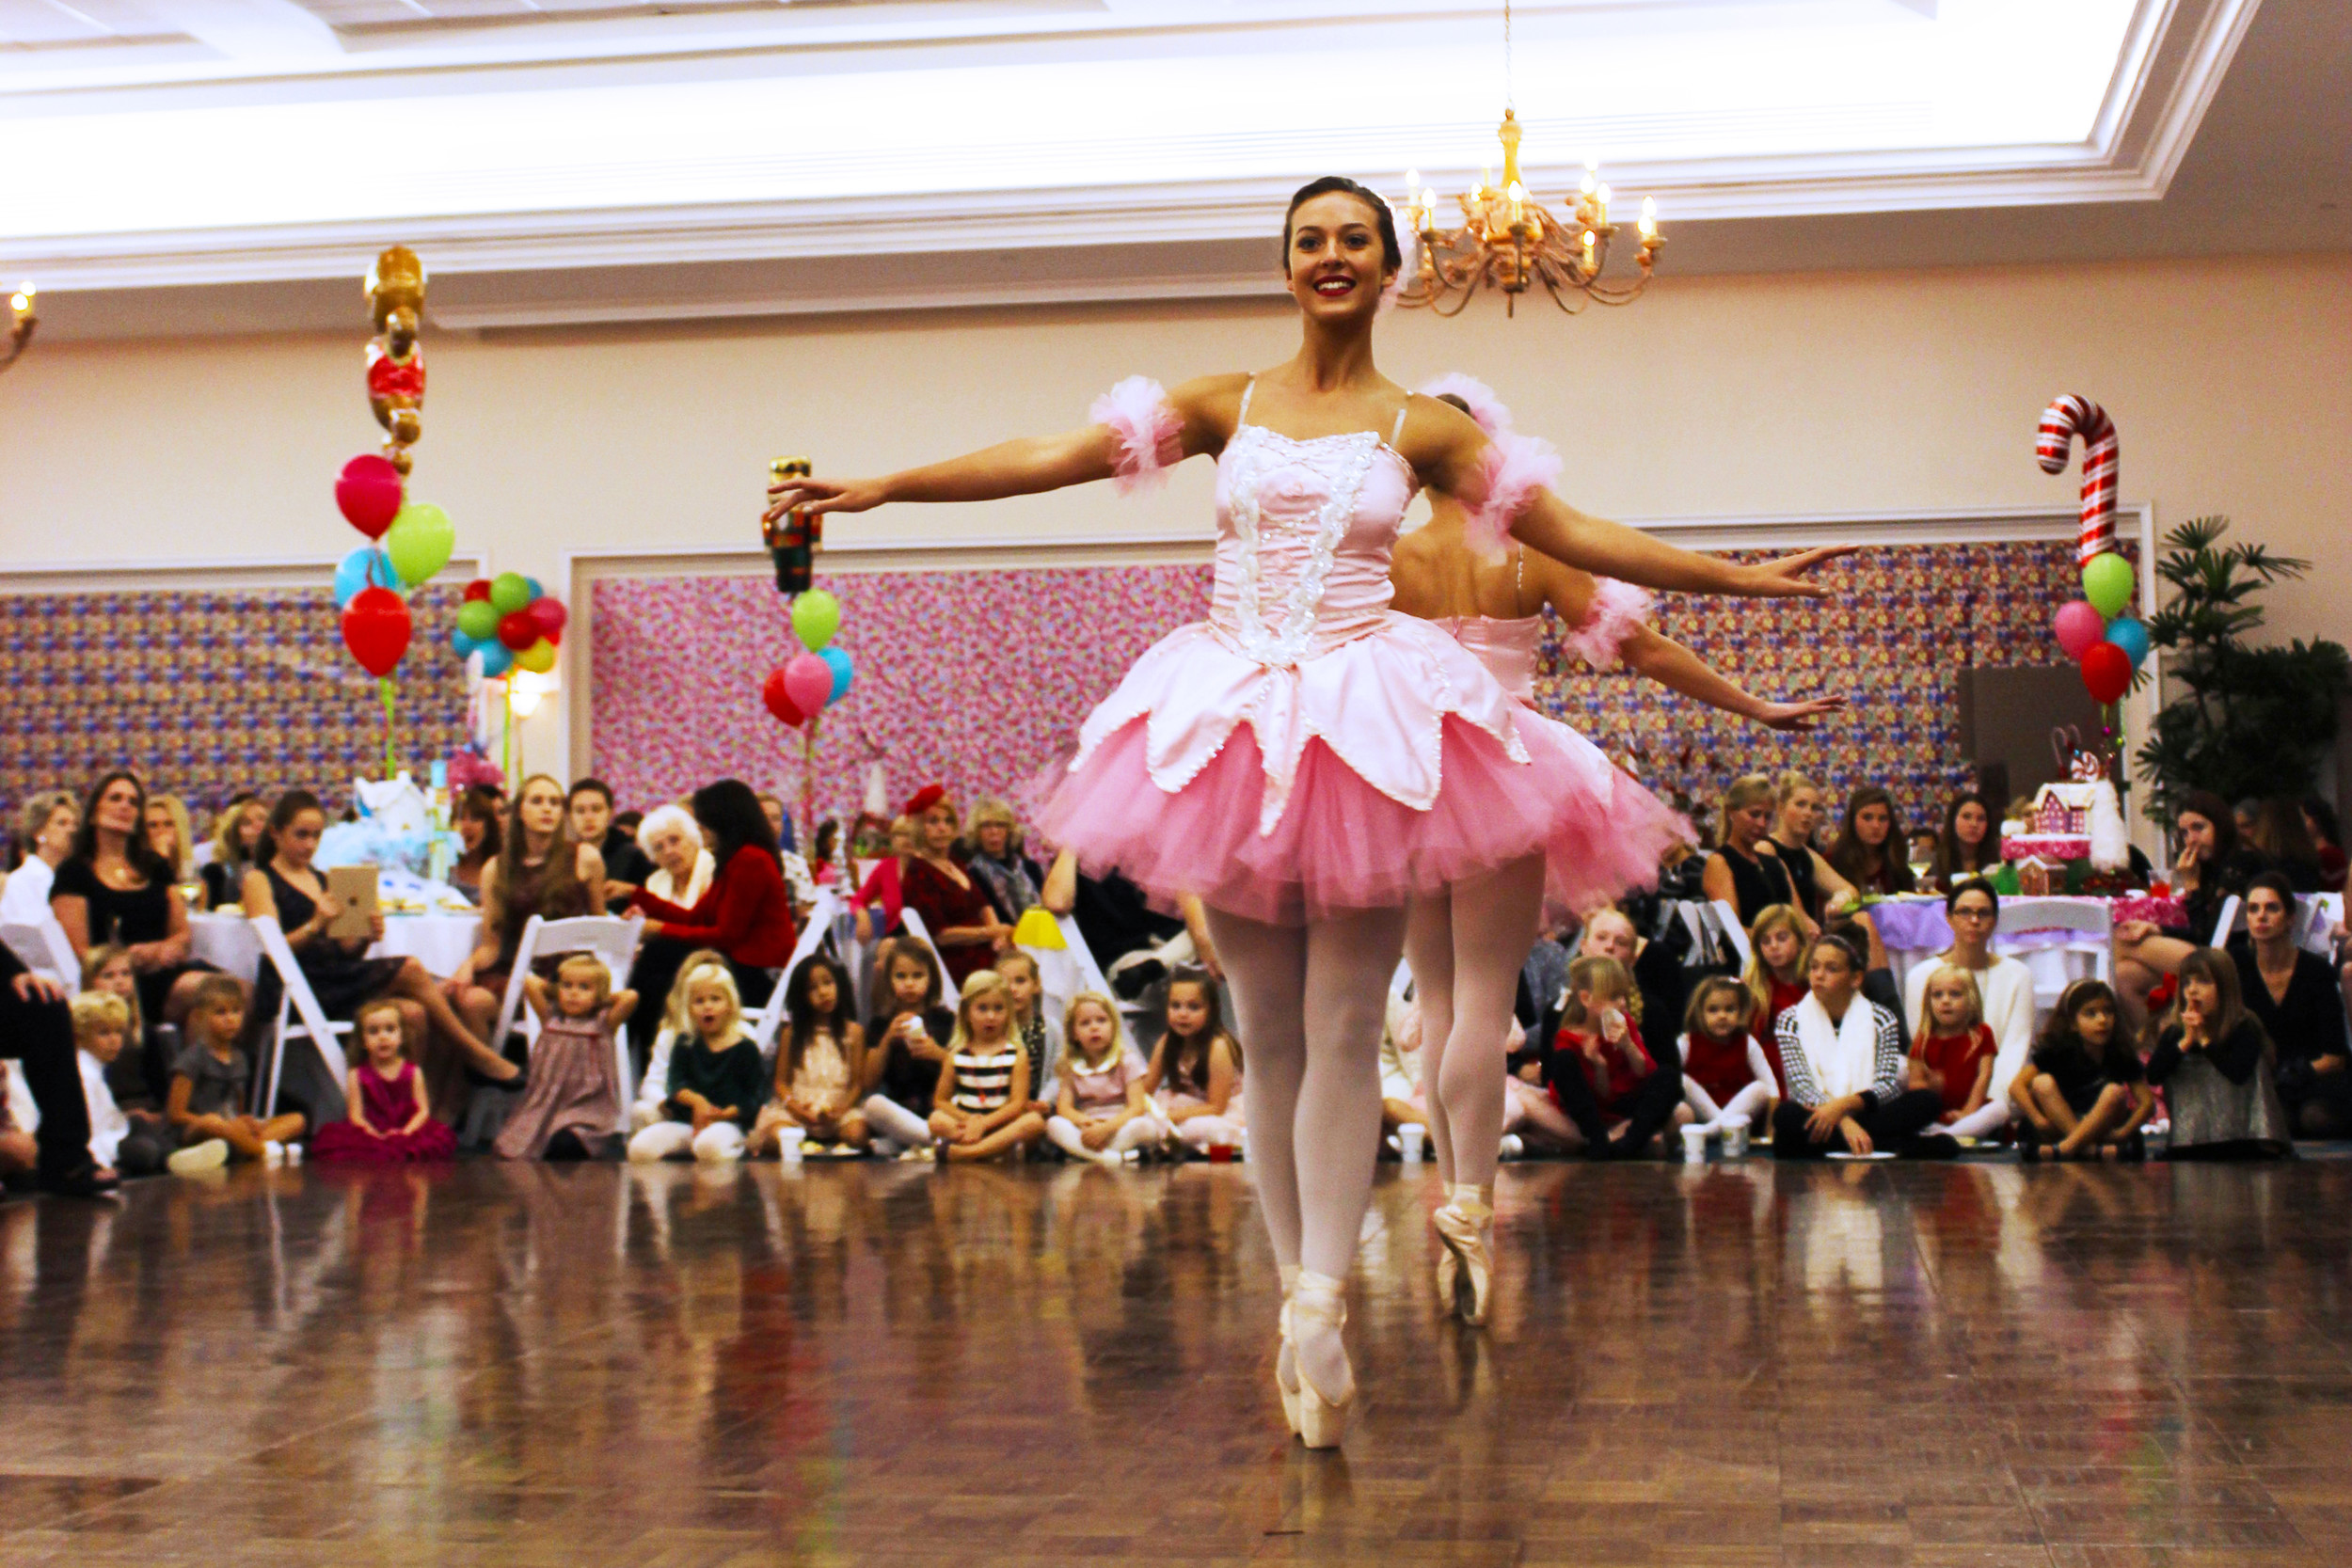 Two experienced dancers presented a routine from the second act of The Nutcracker.